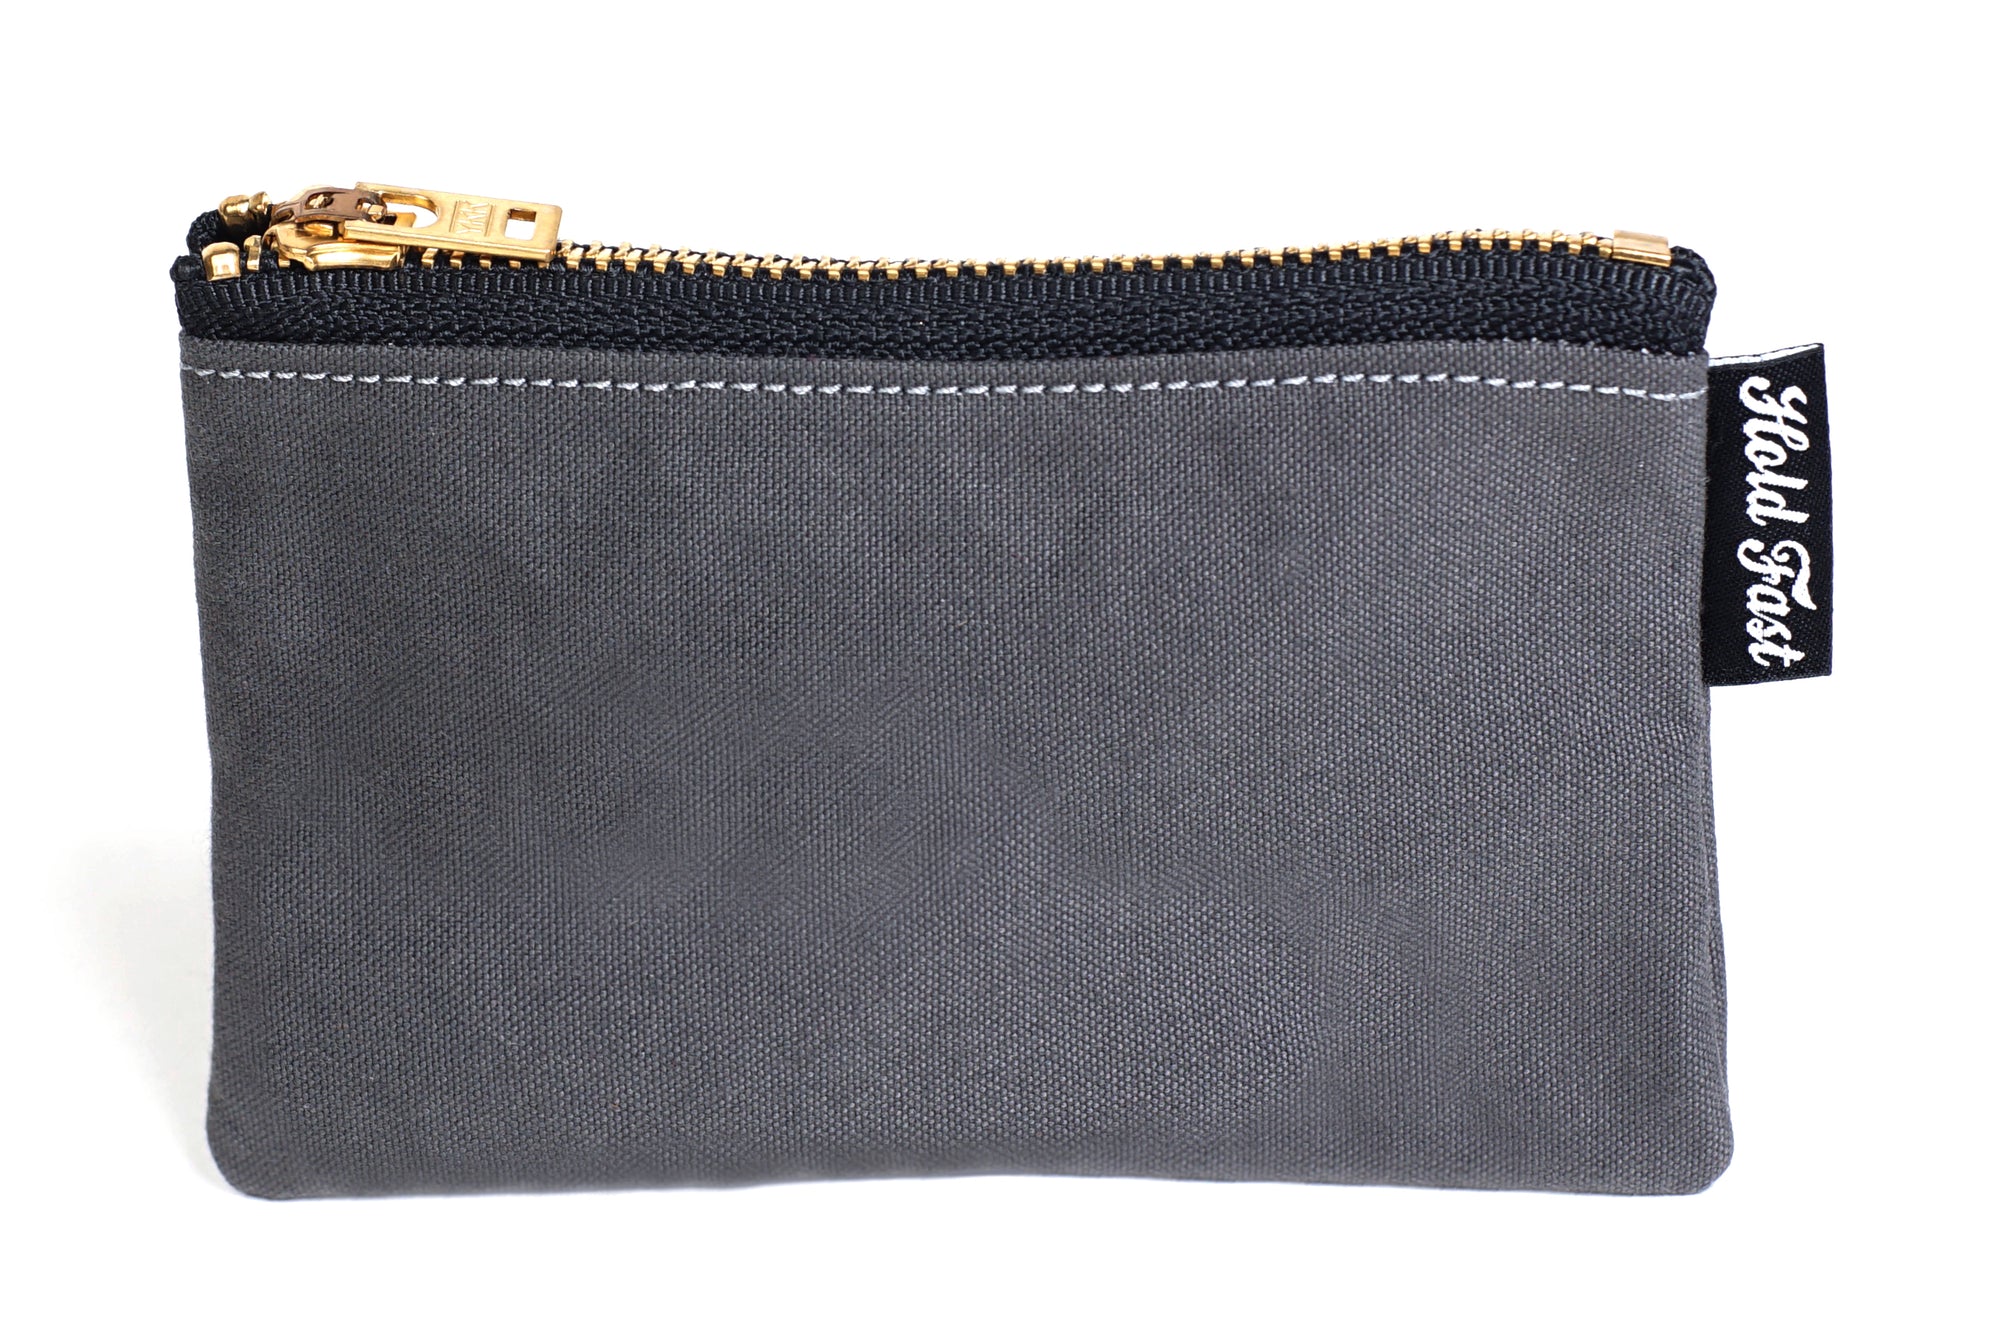 3 x 5 Hold Fast Zippered Pouch